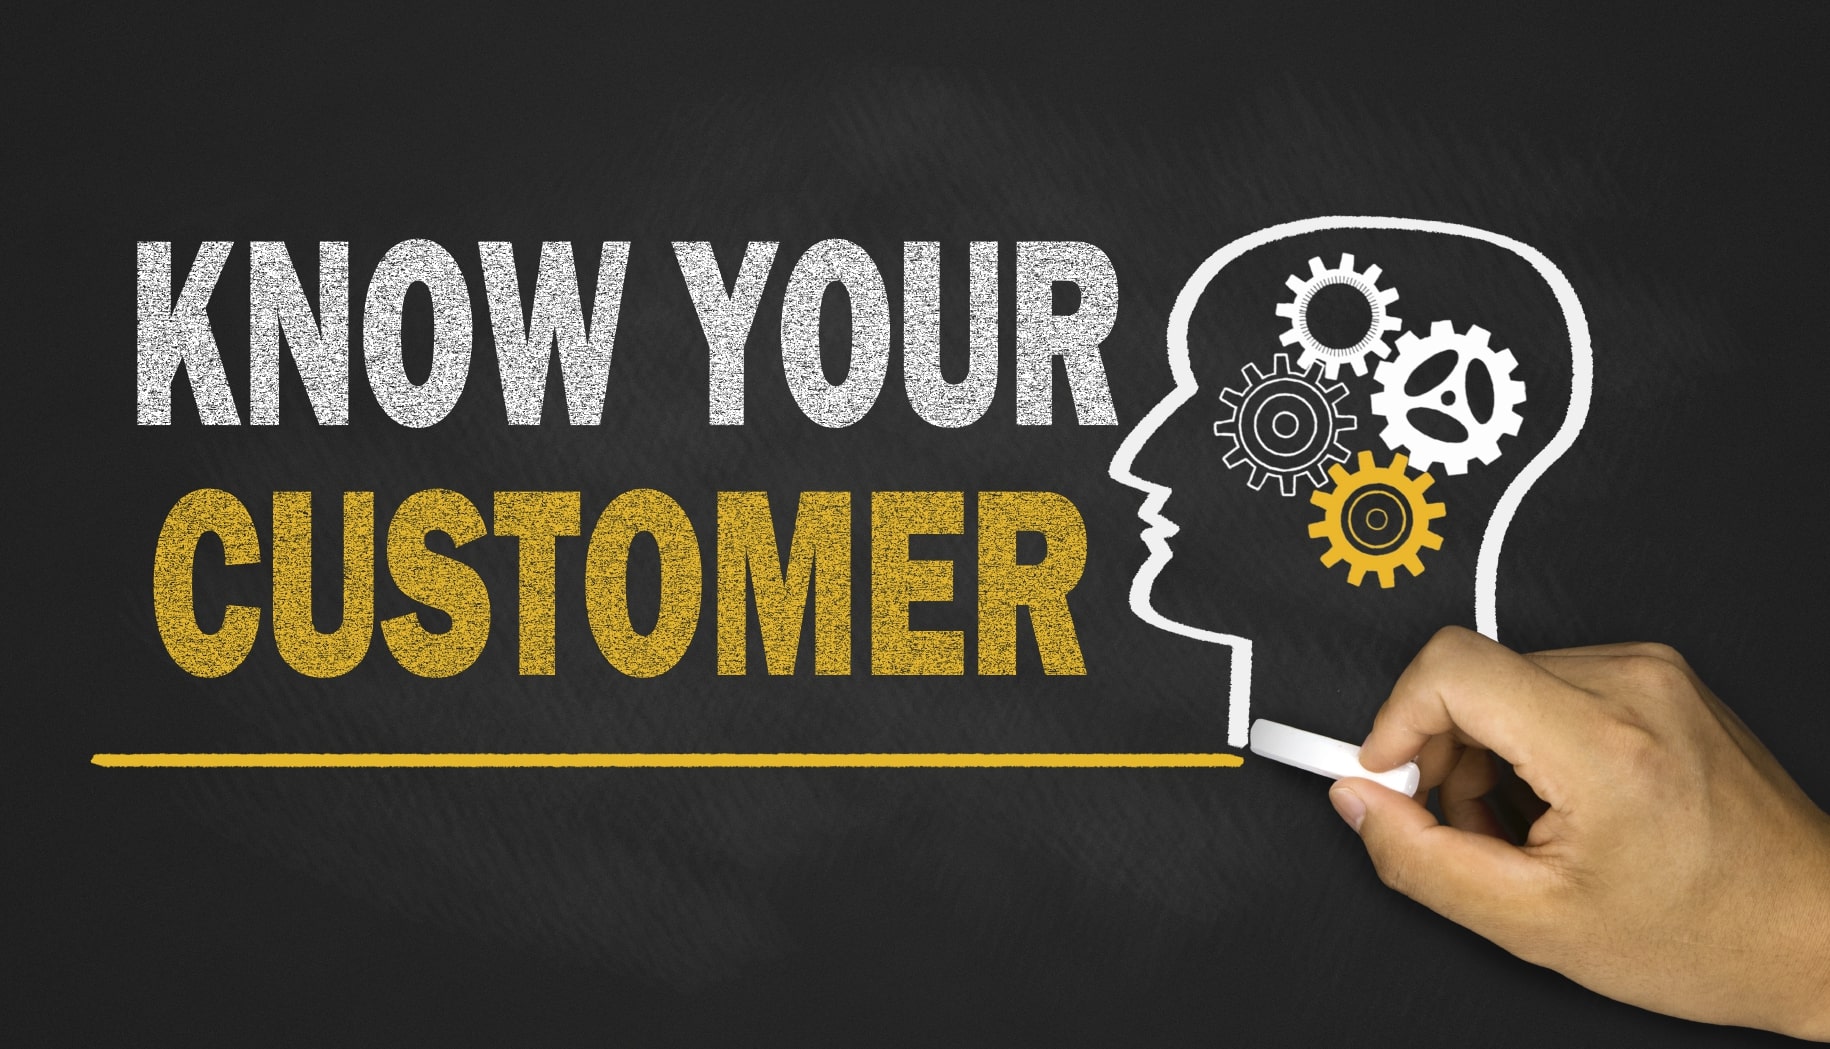 know your customer on social media marketing